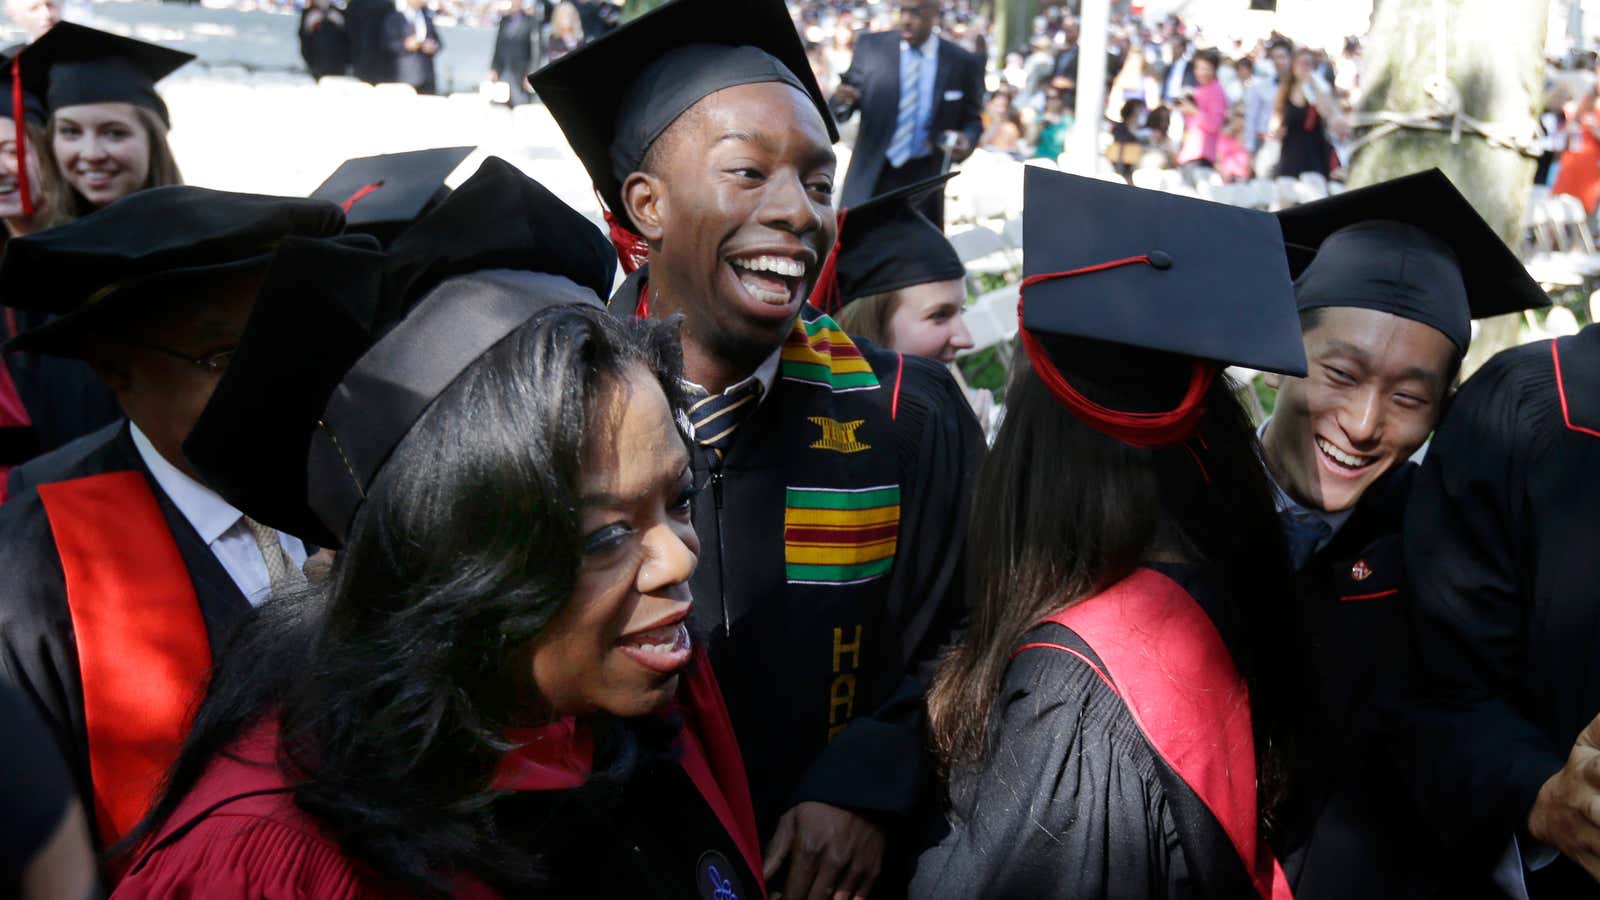 Picture yourself among the Harvard grads, and Oprah. For free.